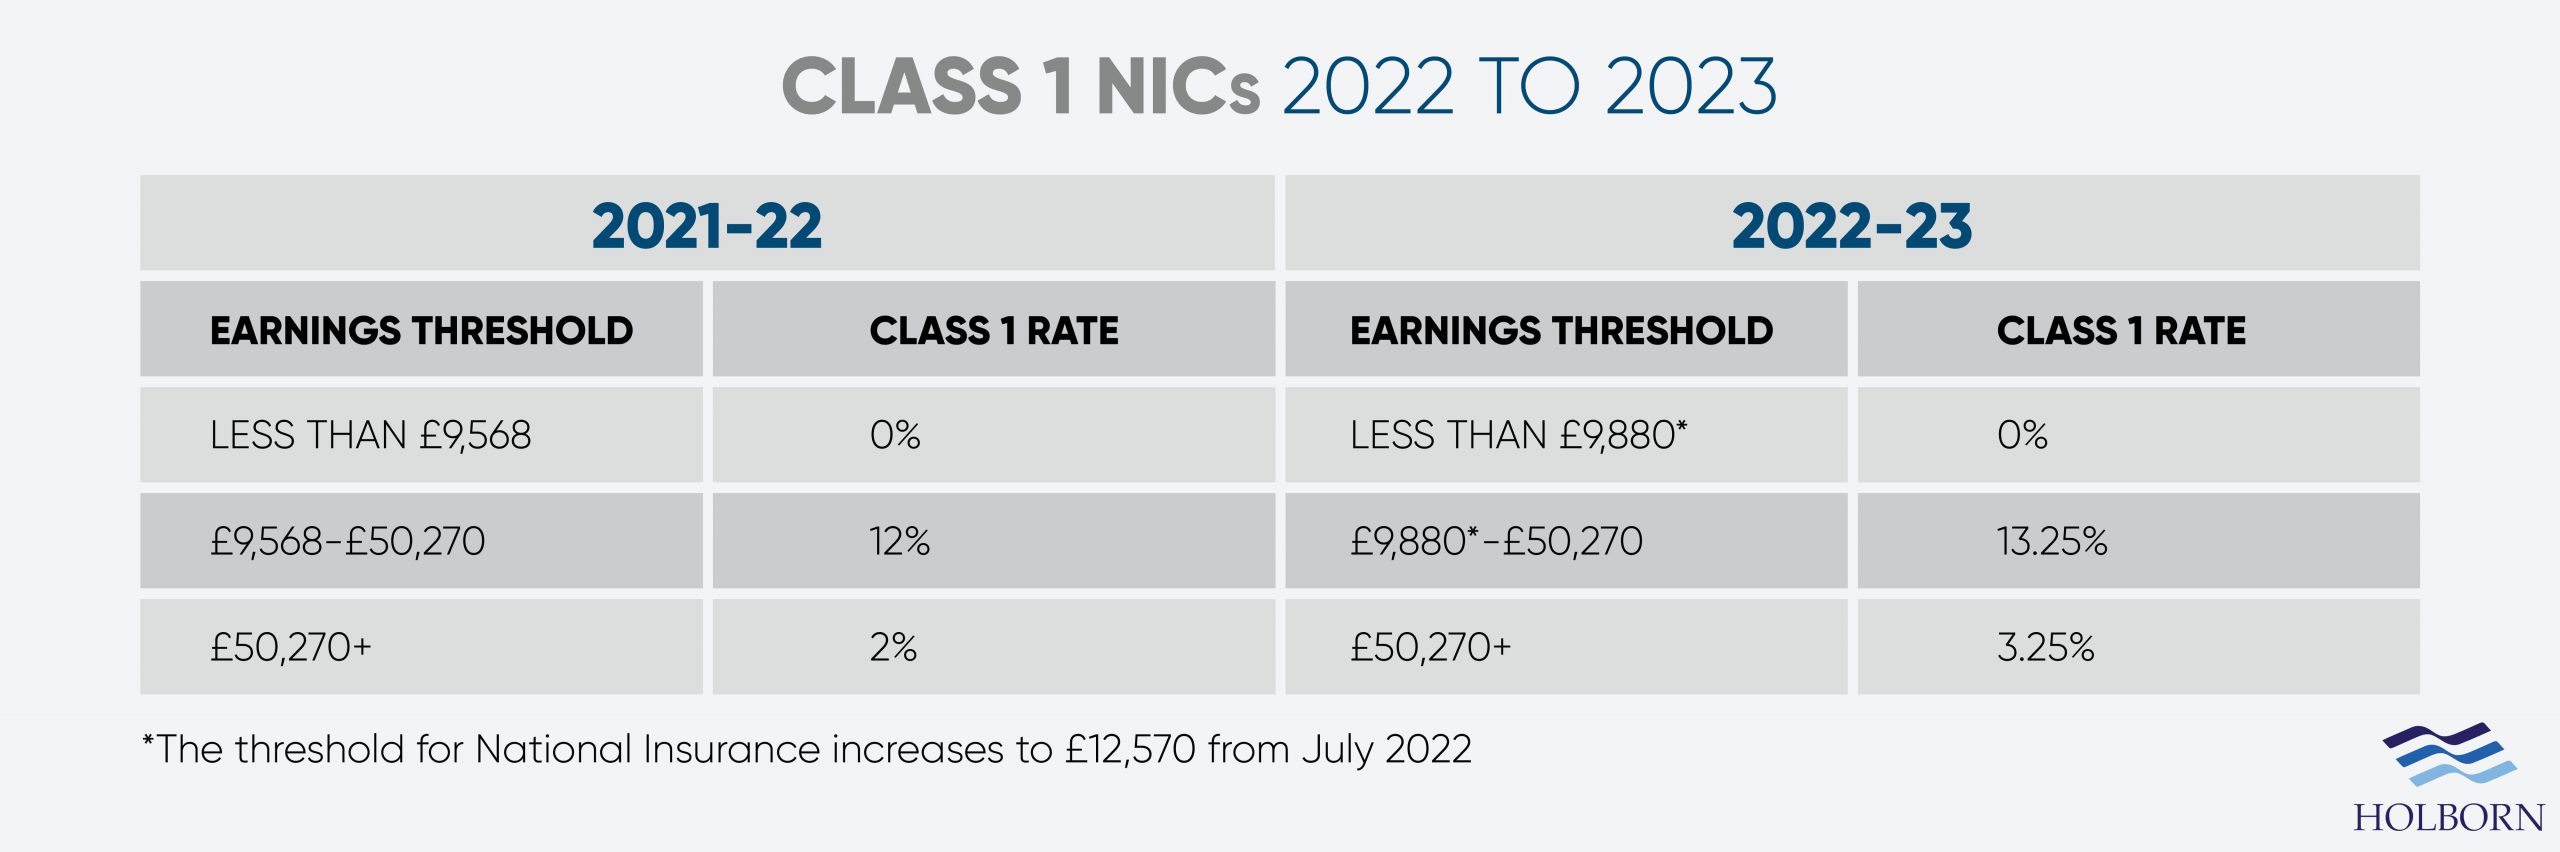 Changes to UK tax in 2022